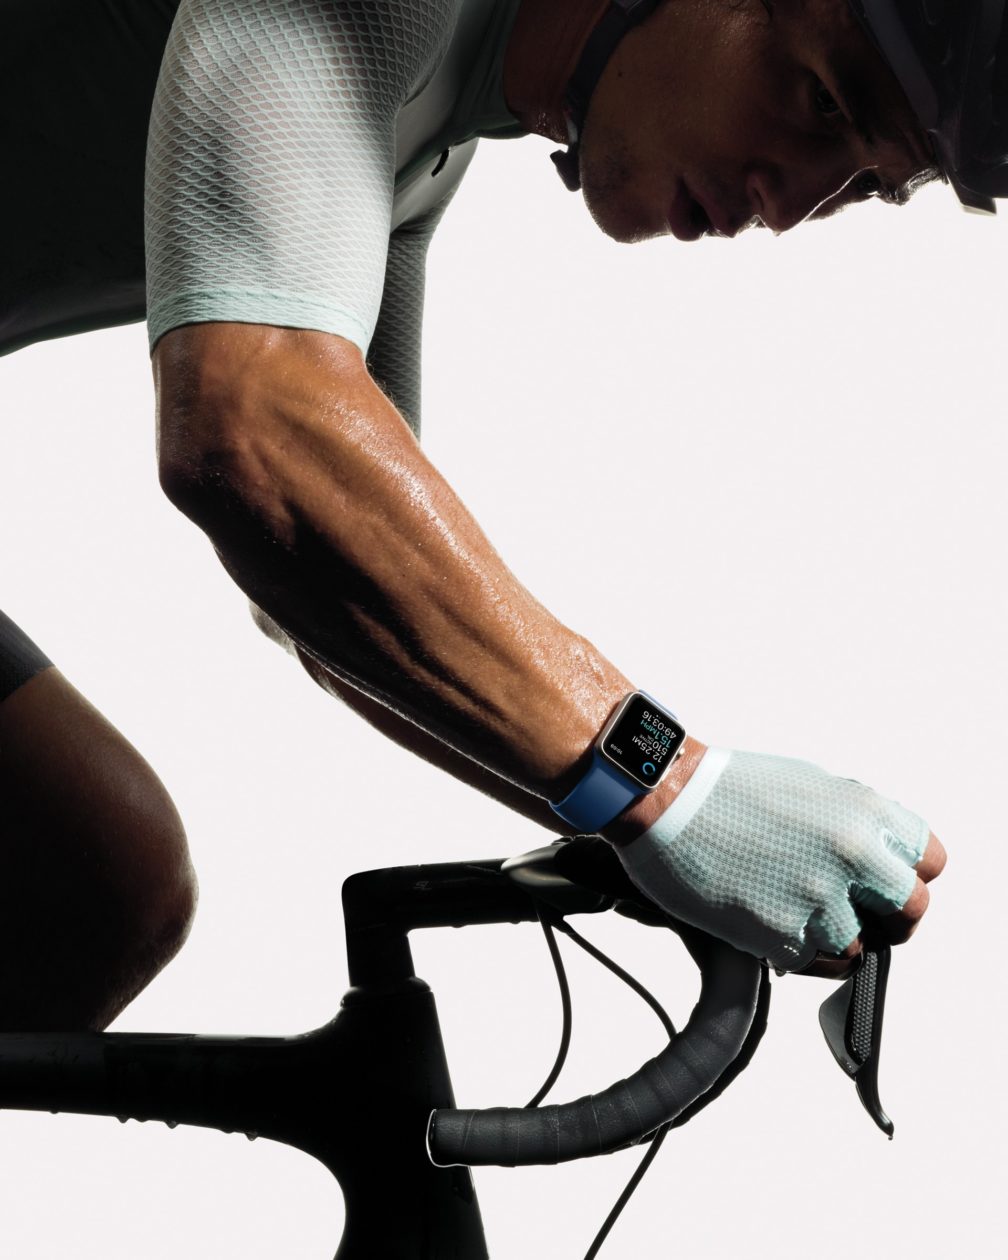 Apple Watch Series 2 being used on a bicycle